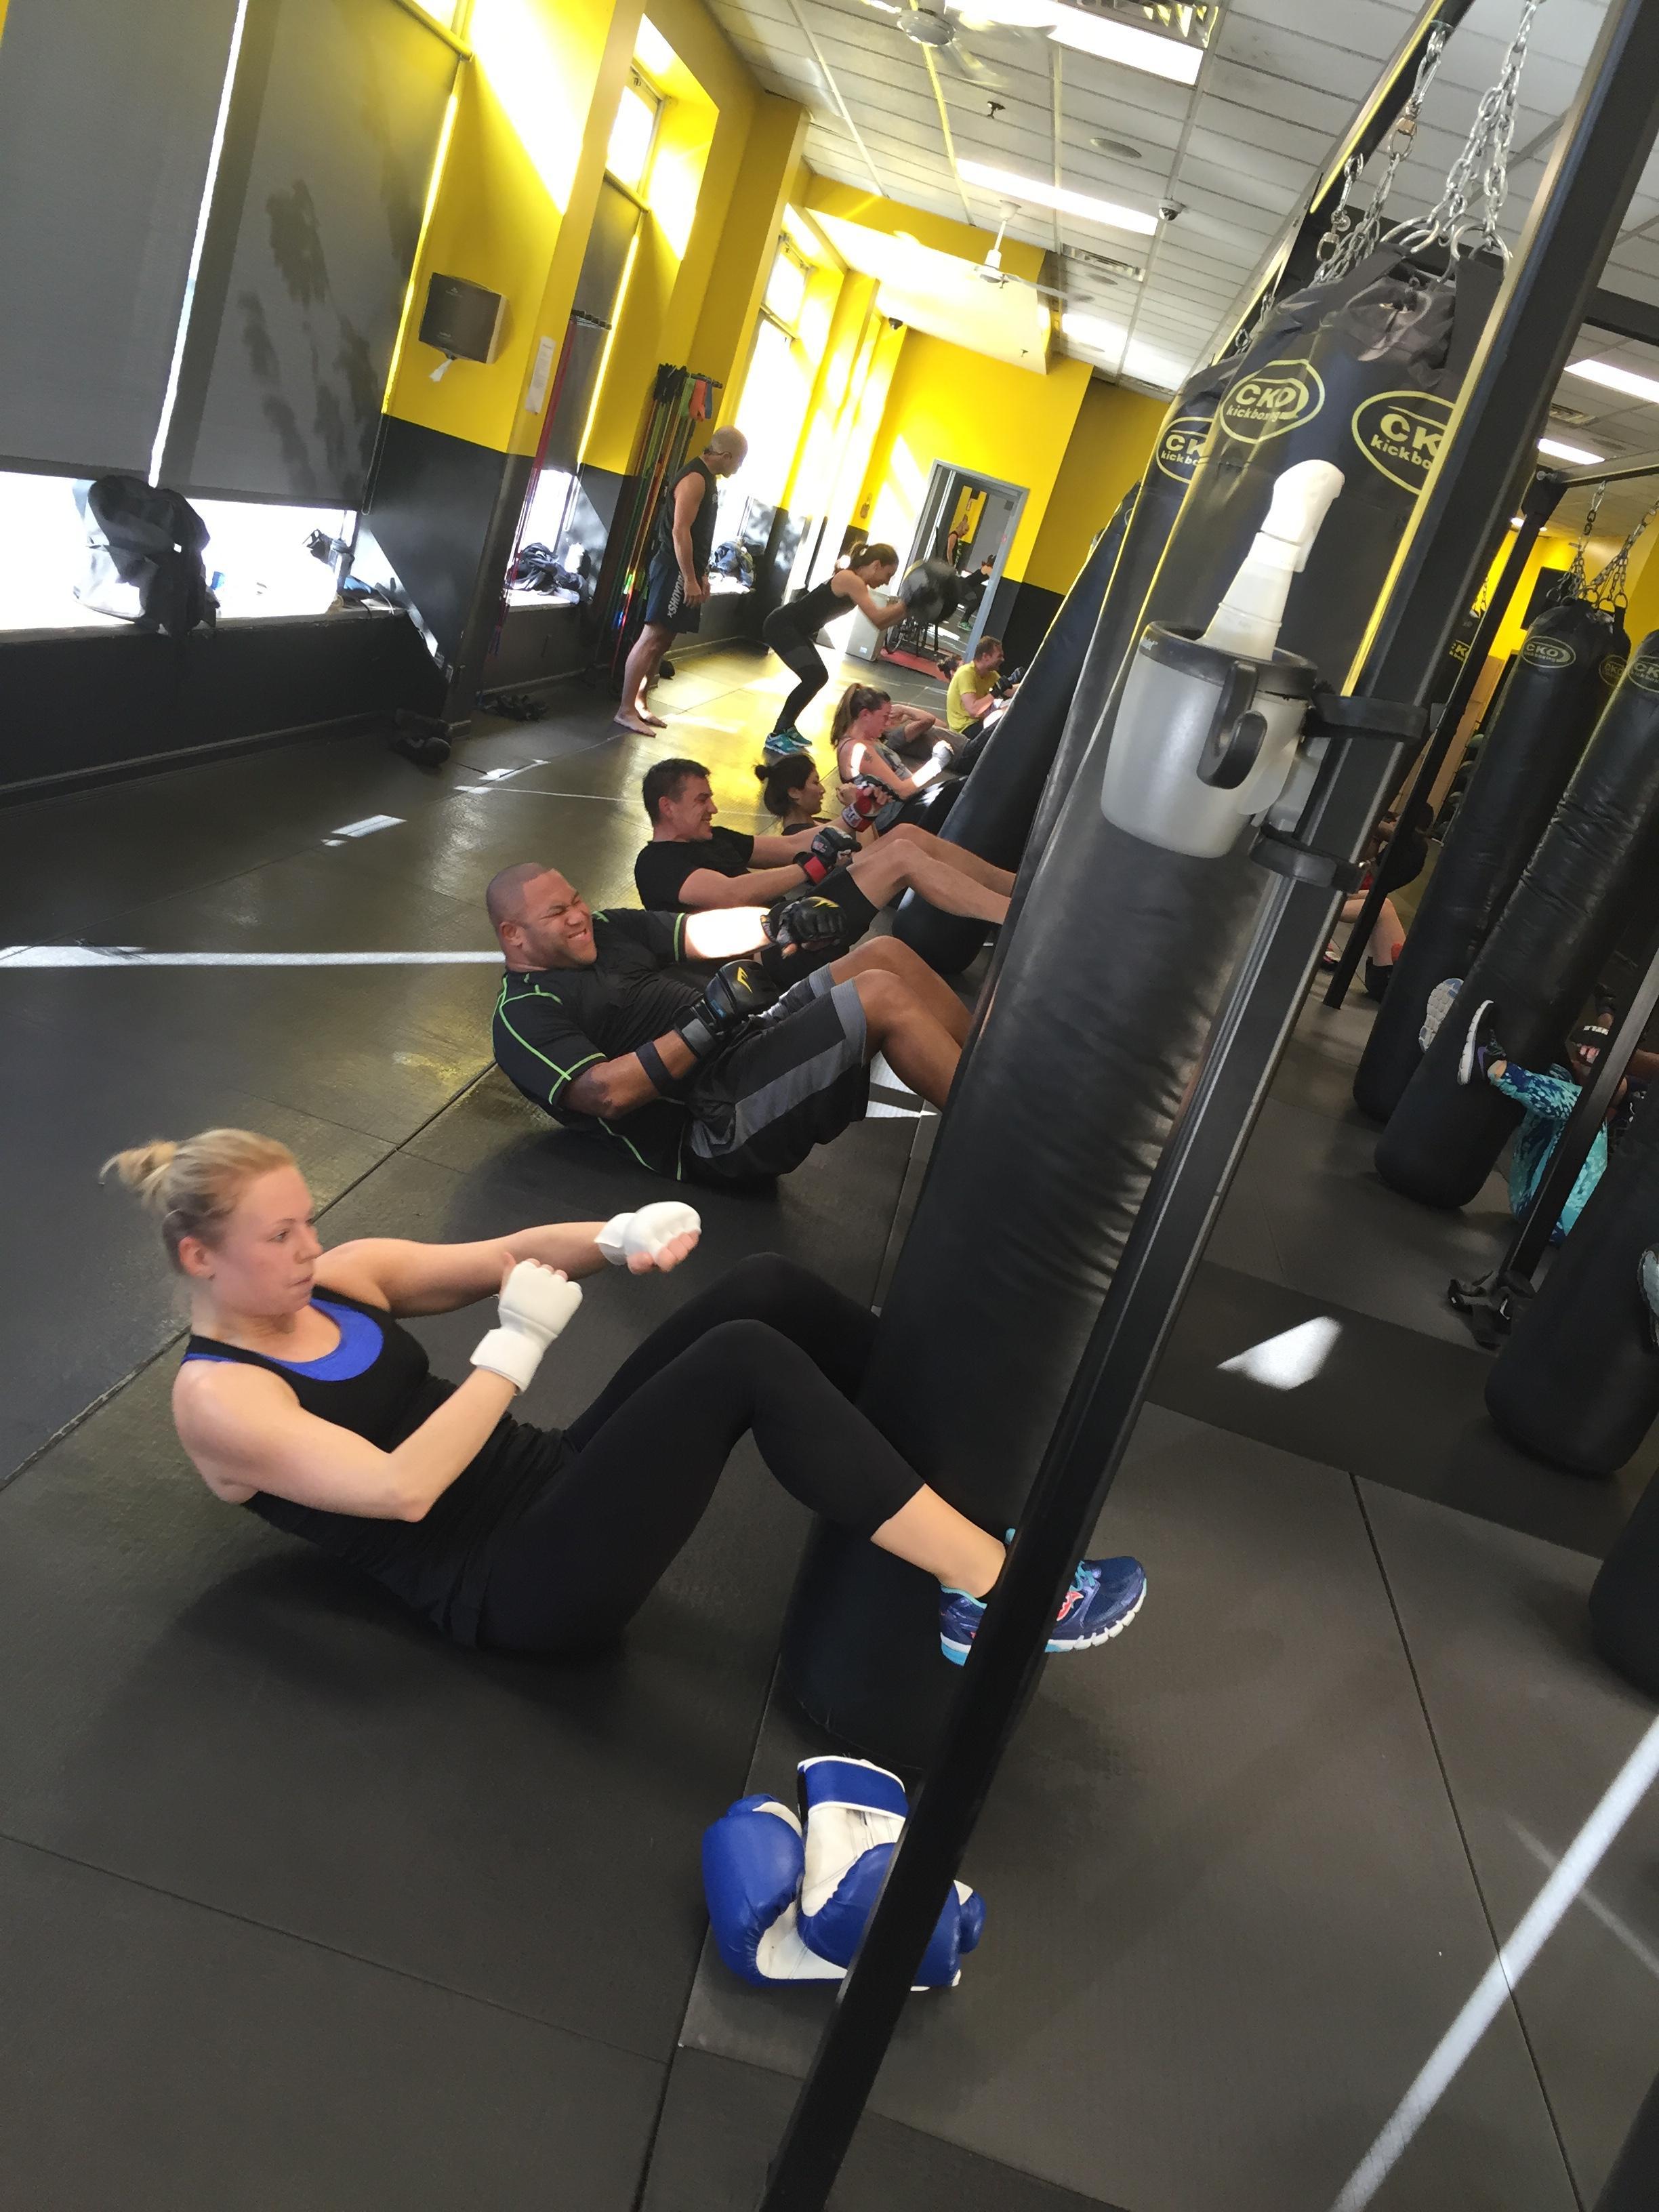 Cko Kickboxing 562 Court St Brooklyn Ny Health Clubs Gyms